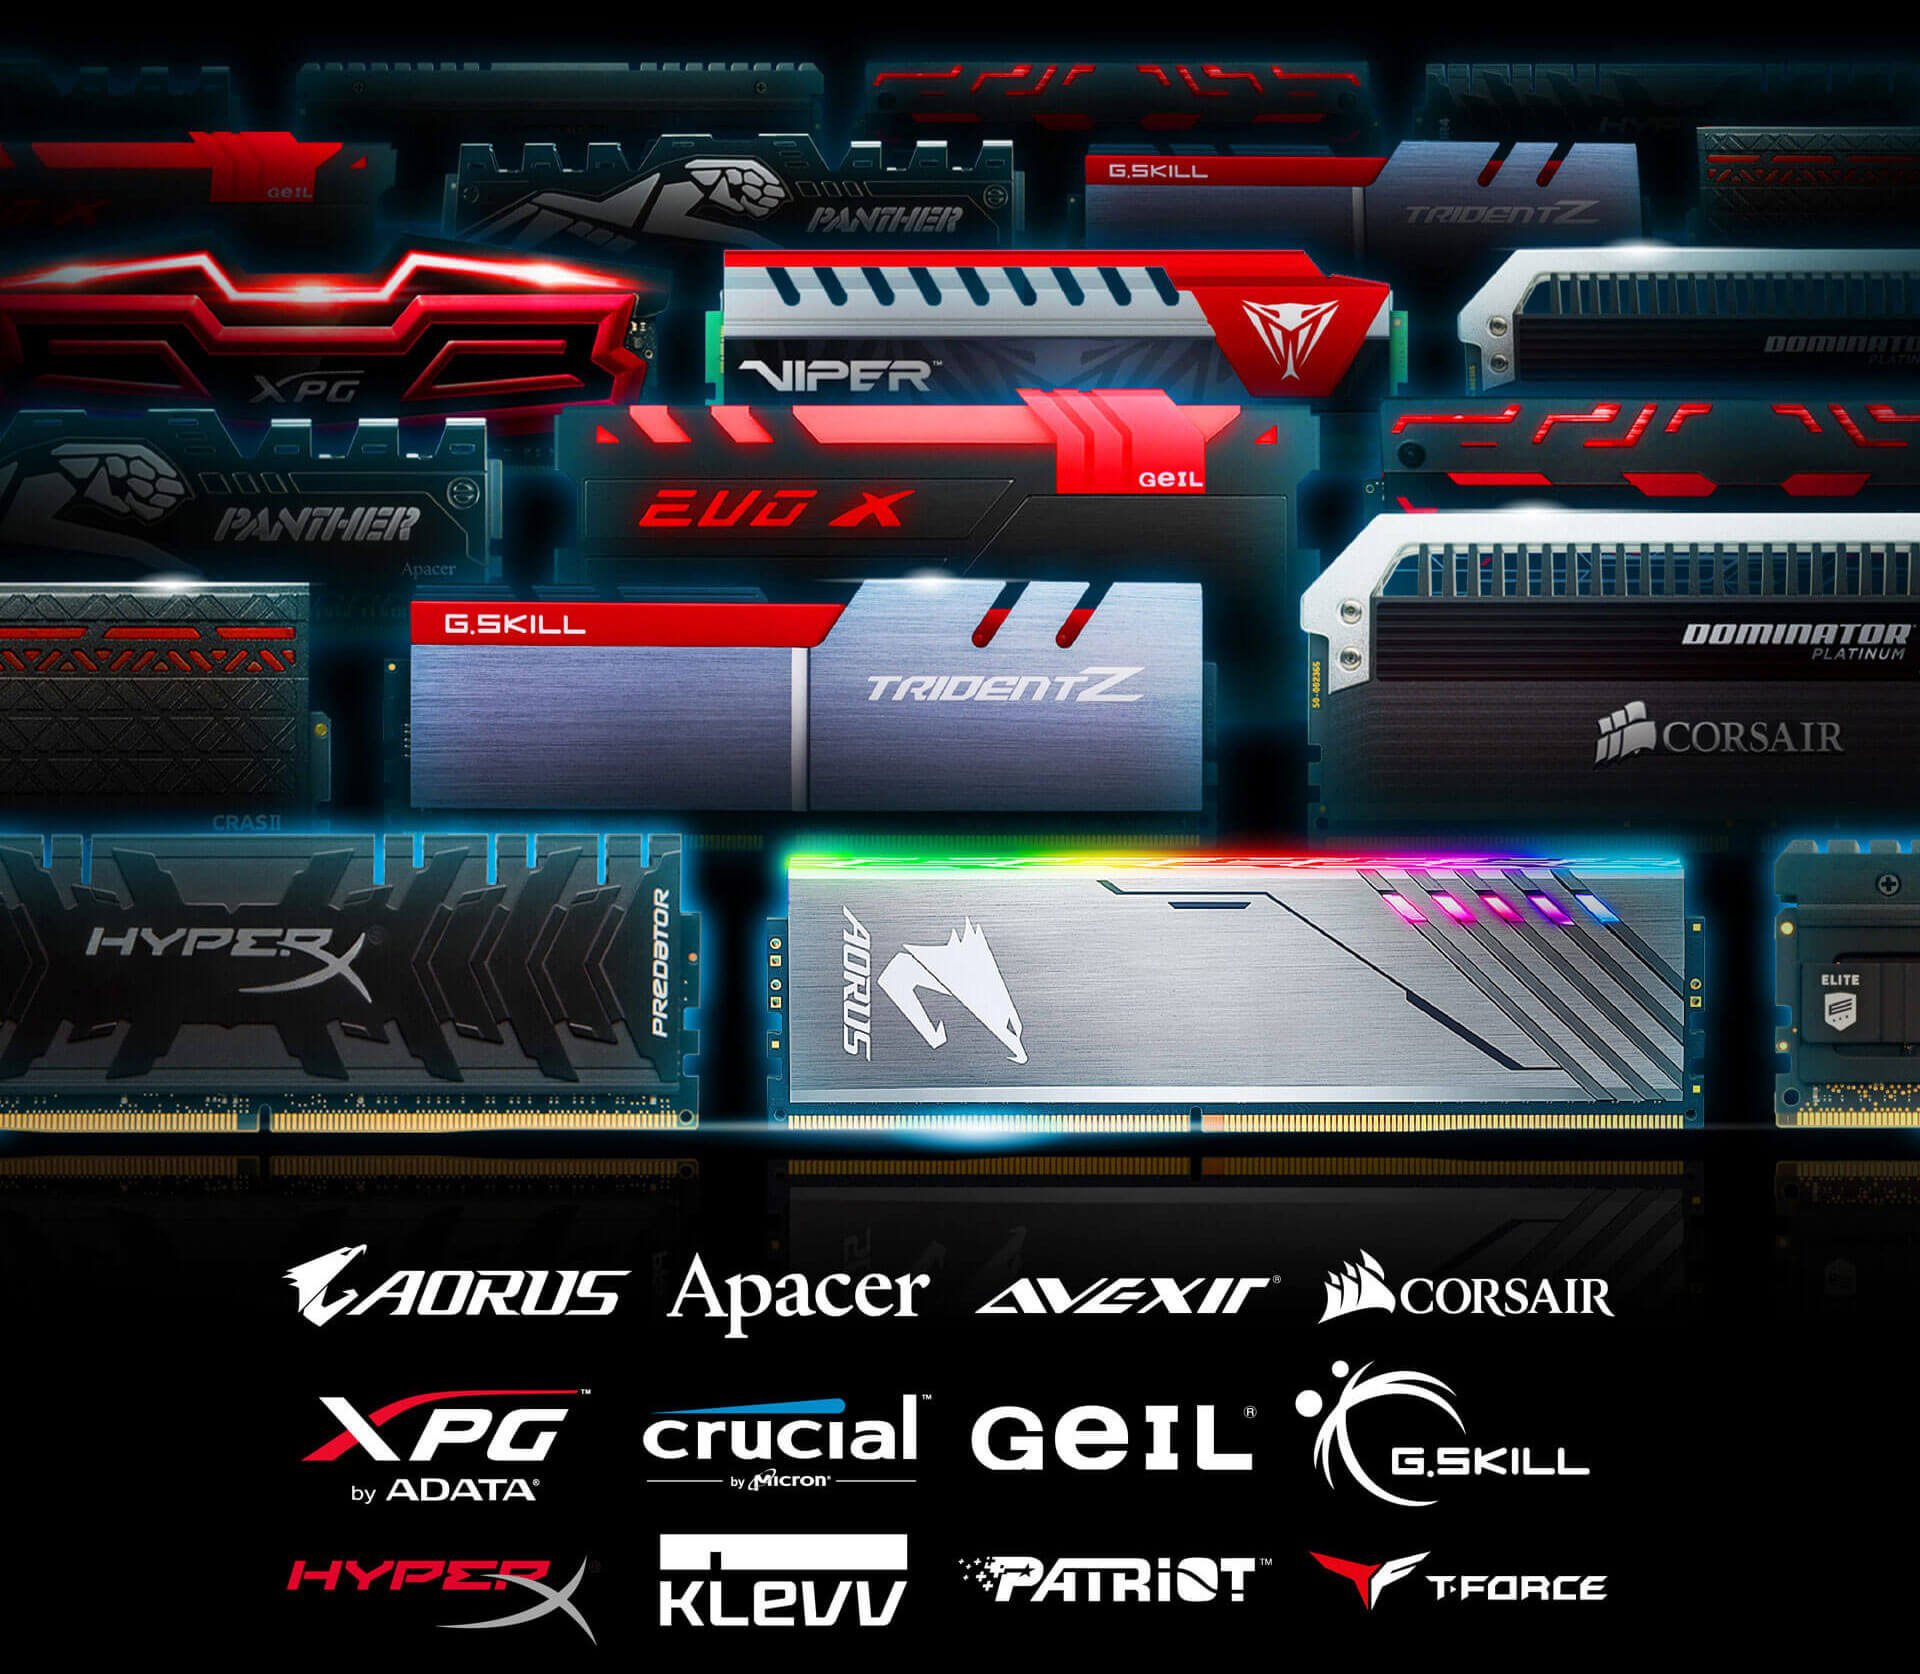 A variety of memory sticks from many brands as well as Logos for AORUS, Apacer, Avexir, Corsair, XPG by ADATA, Crucial, Geil, G.Skill, HyperX, KLEVV, Patriot and T-Force